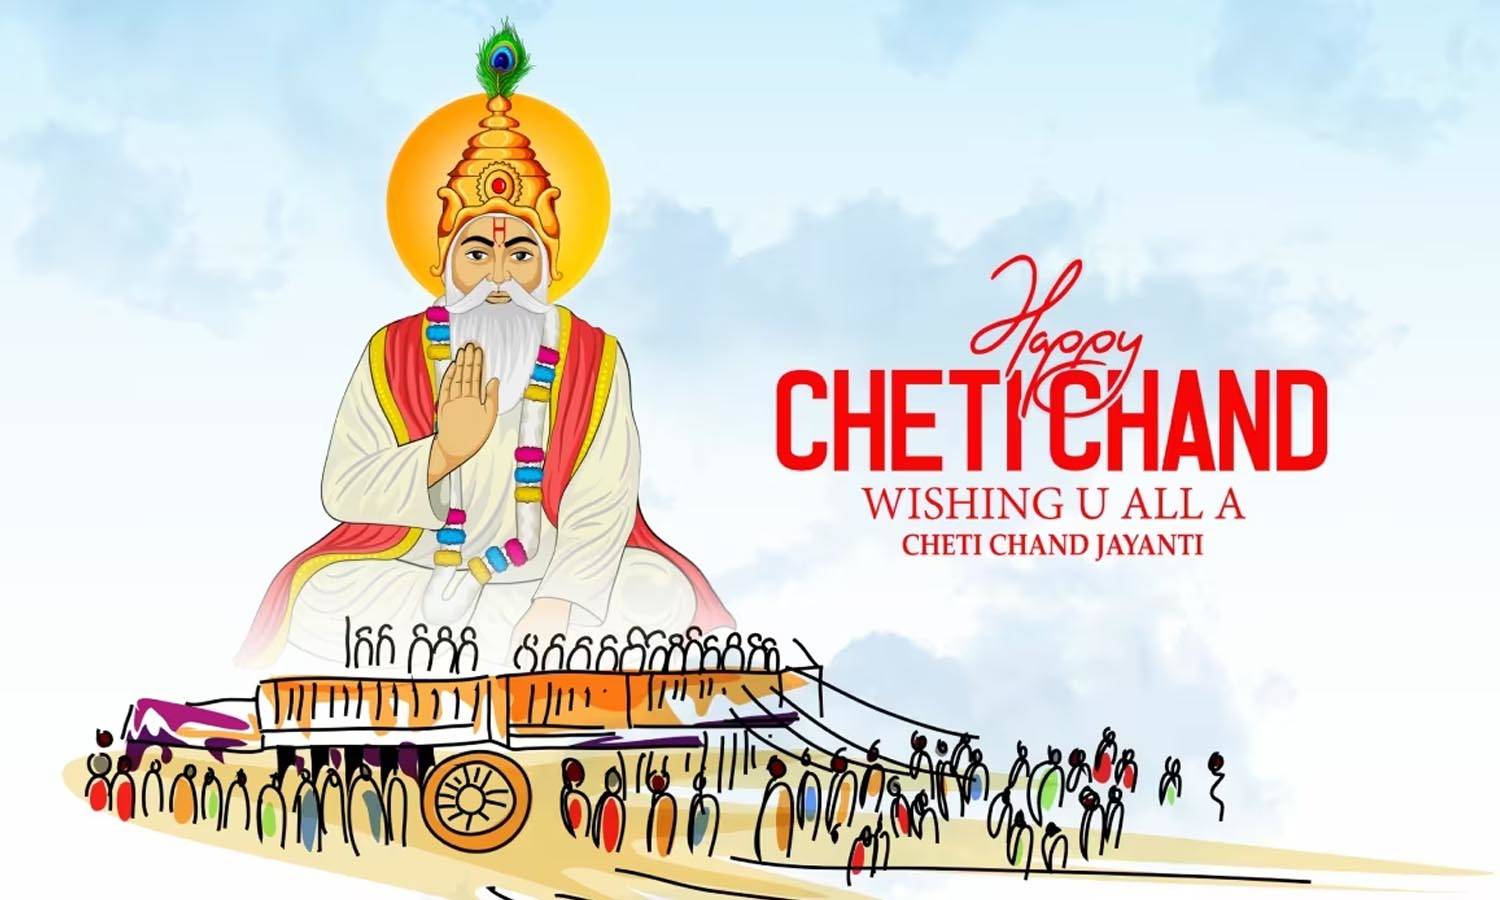 Cheti Chand 2023 images